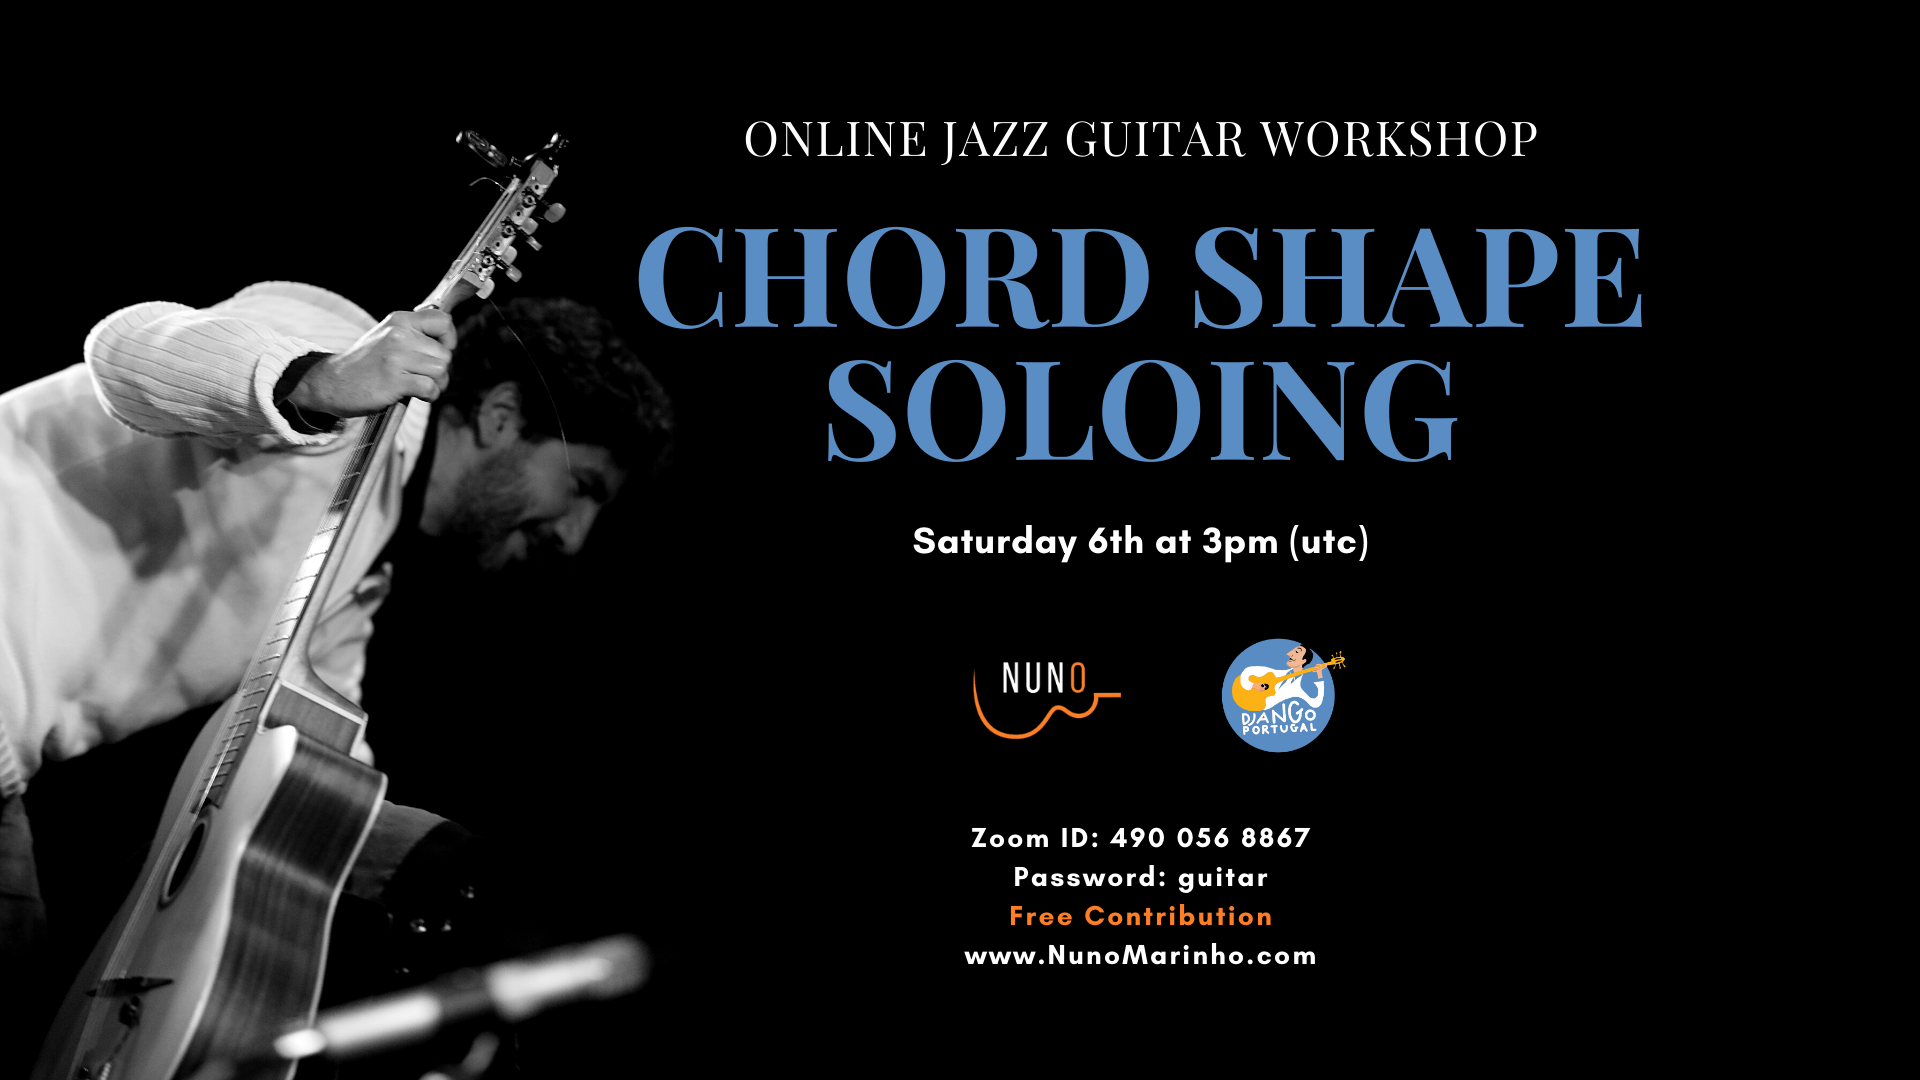 CHORD SHAPE SOLOING for Gypsy Jazz